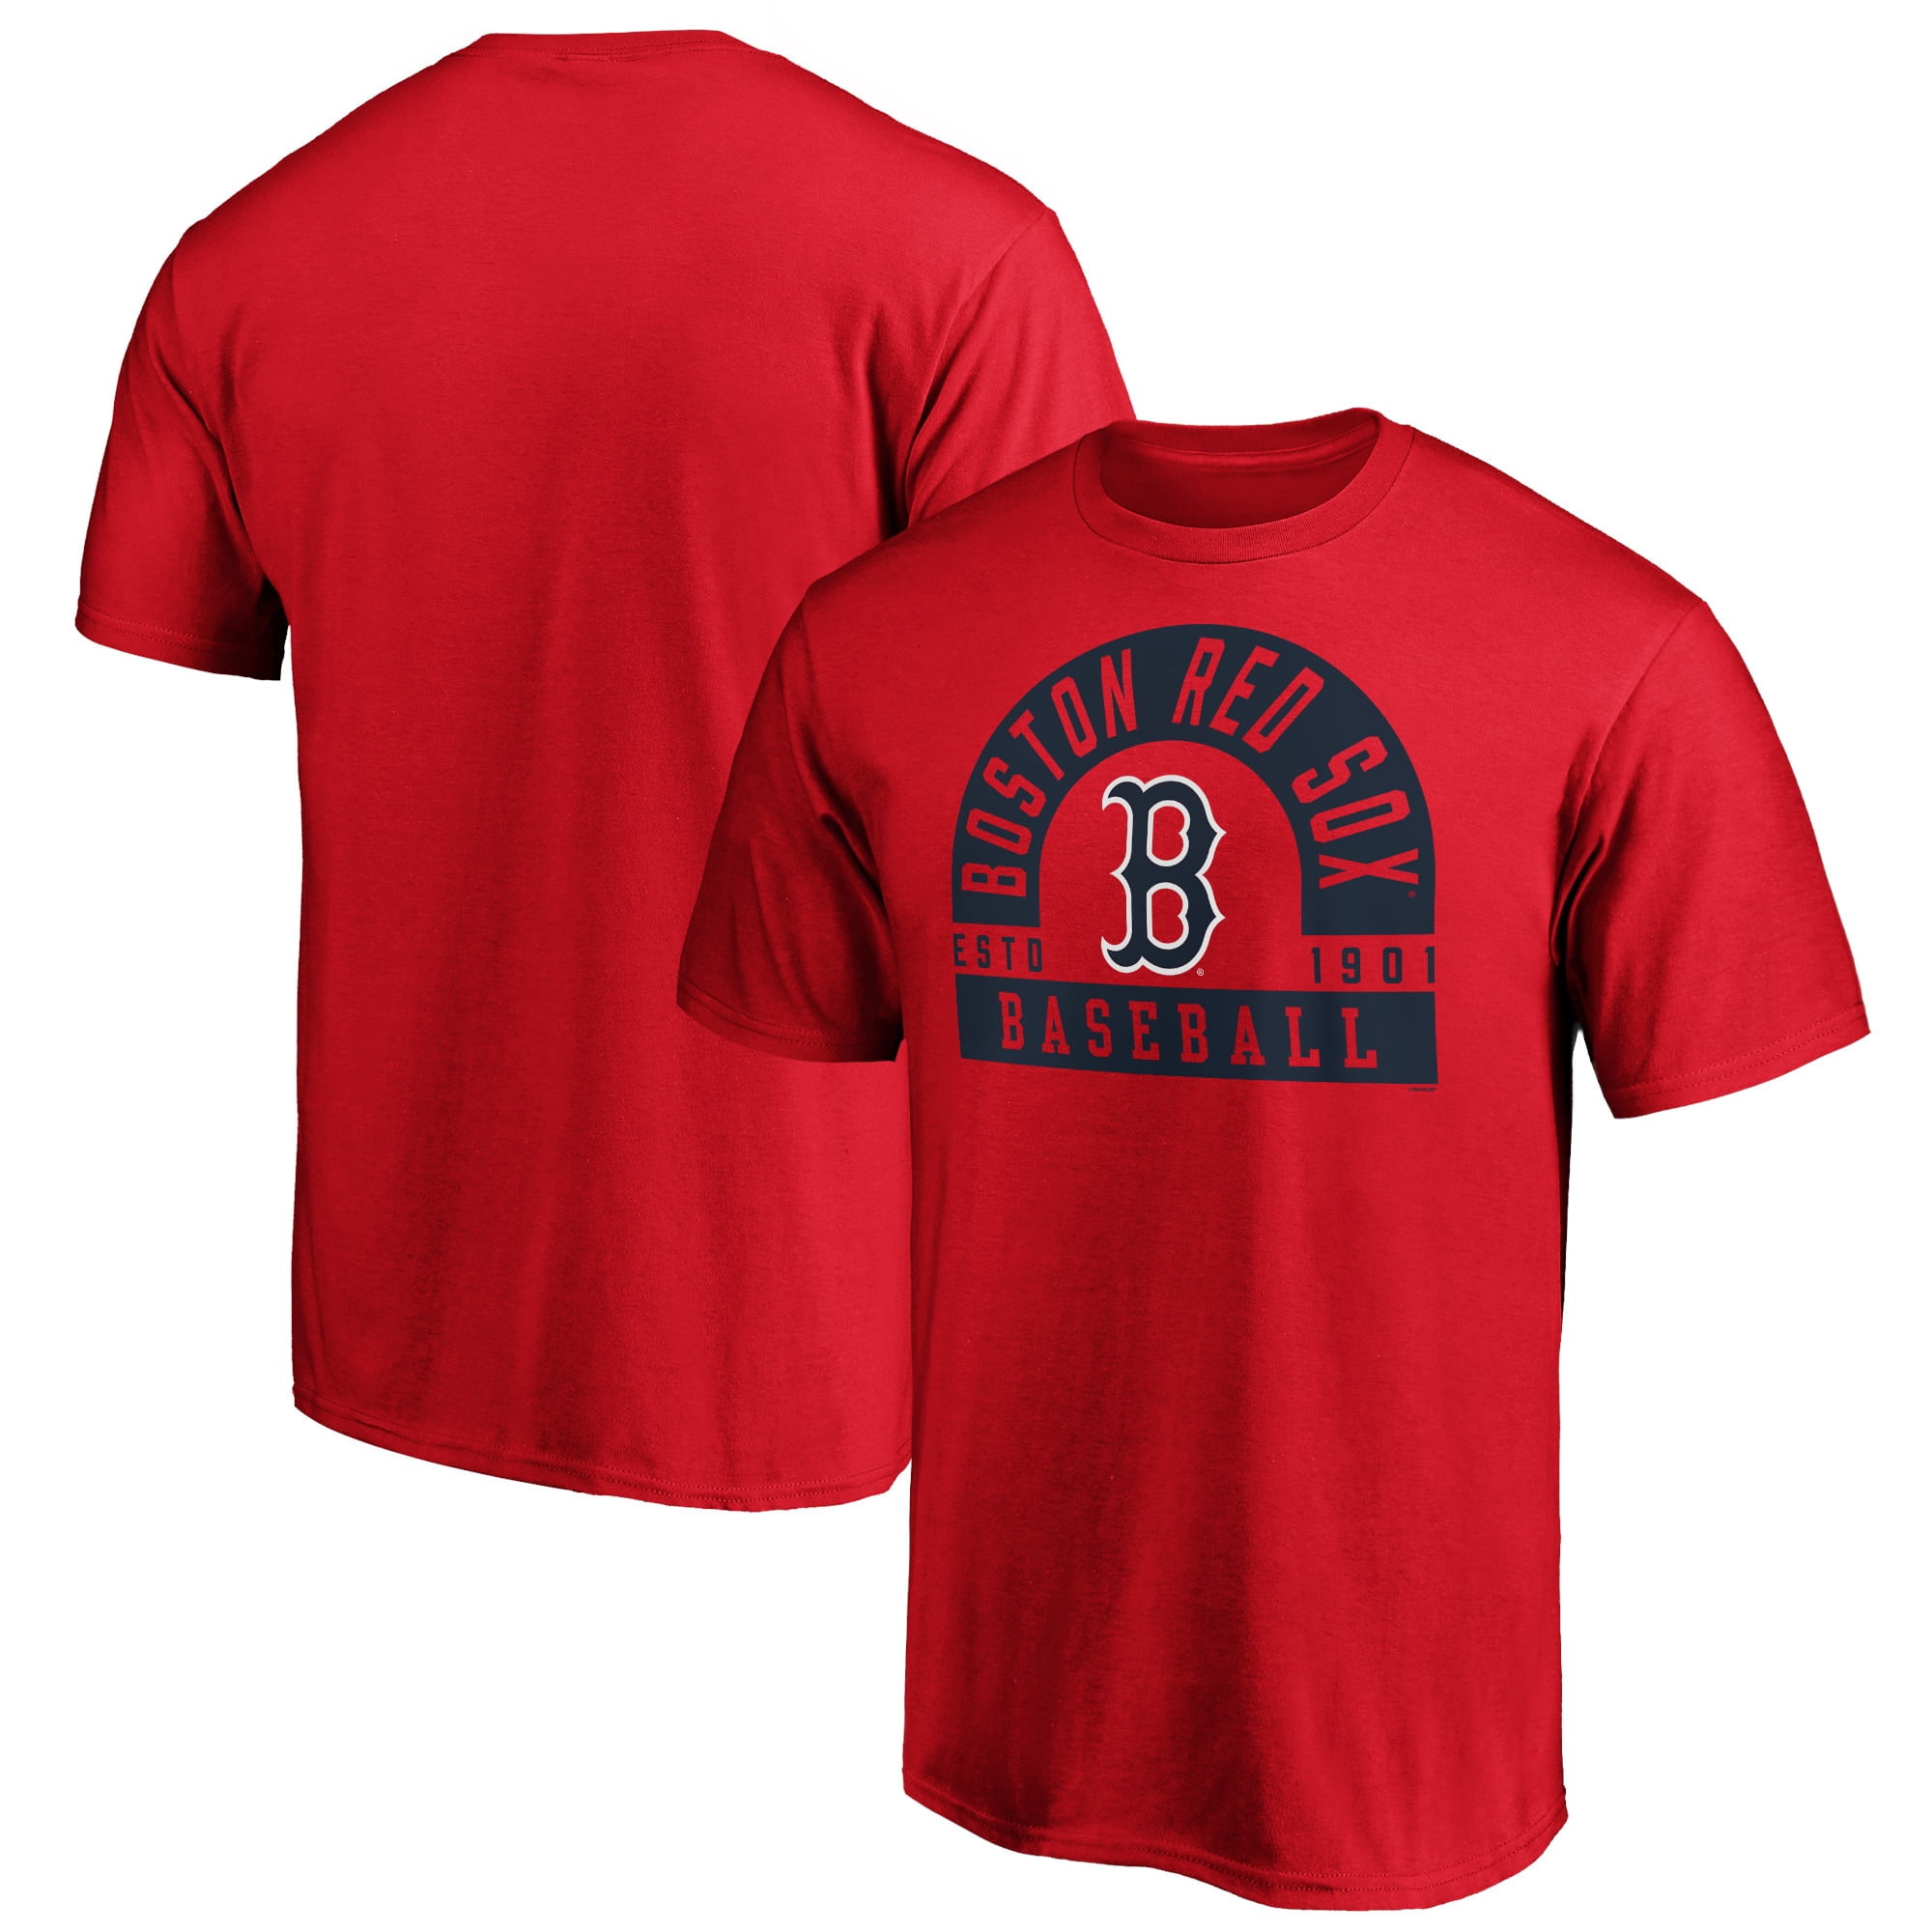 Men's Fanatics Branded Red Boston Red Sox Prime Pass T-Shirt